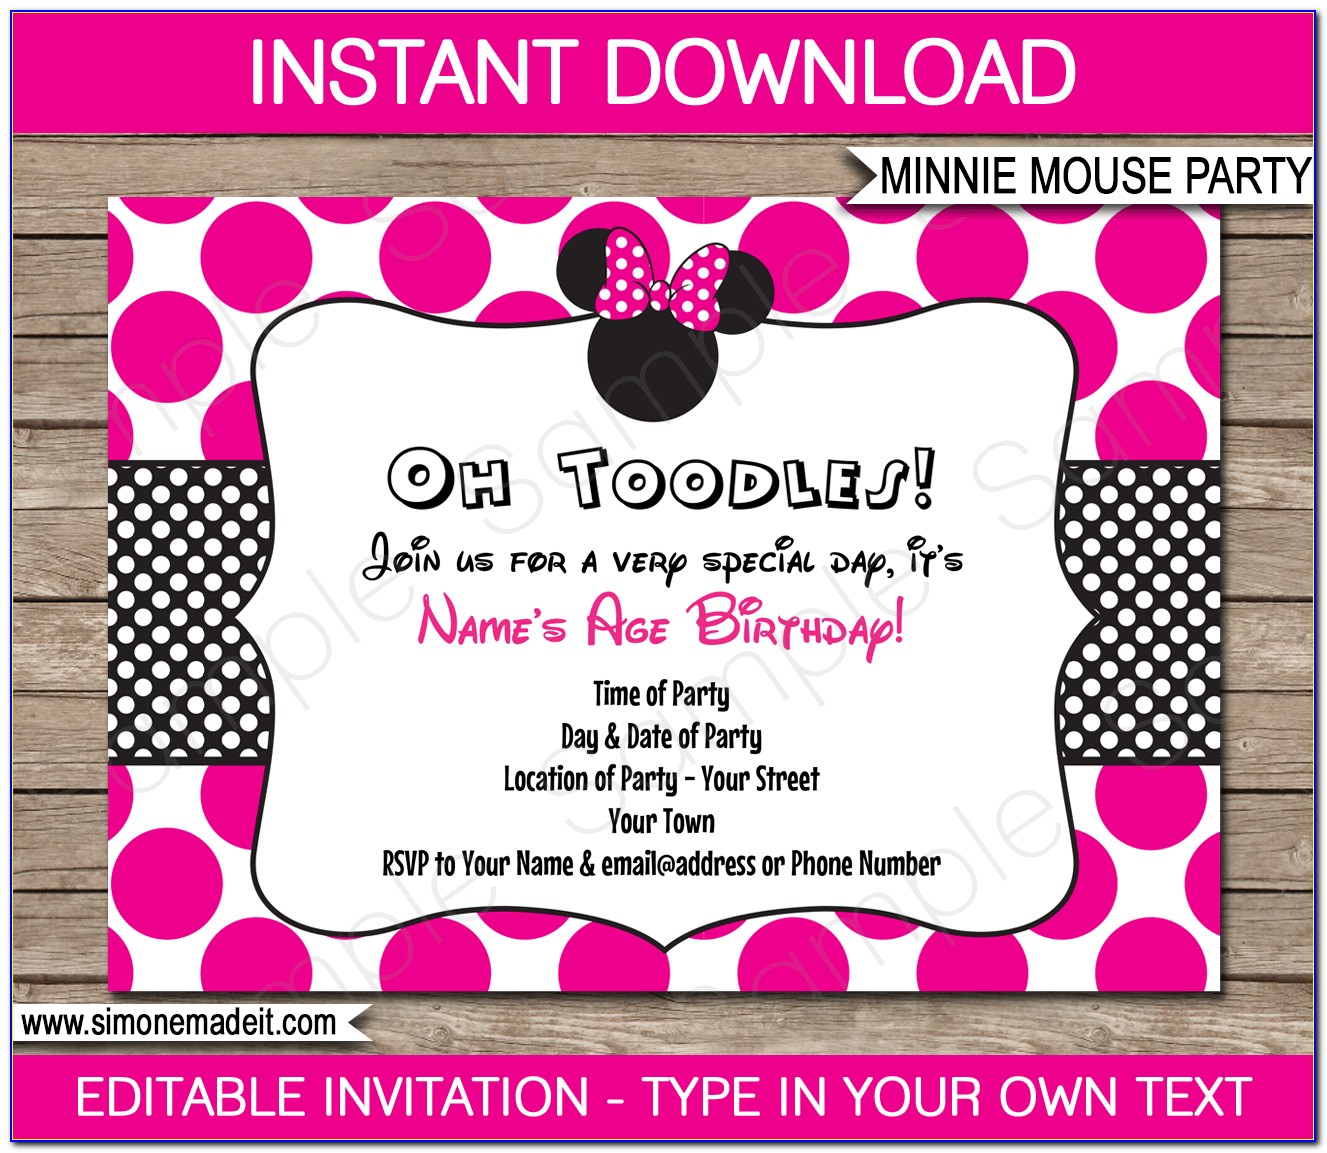 Minnie Mouse Birthday Party Invitations Templates